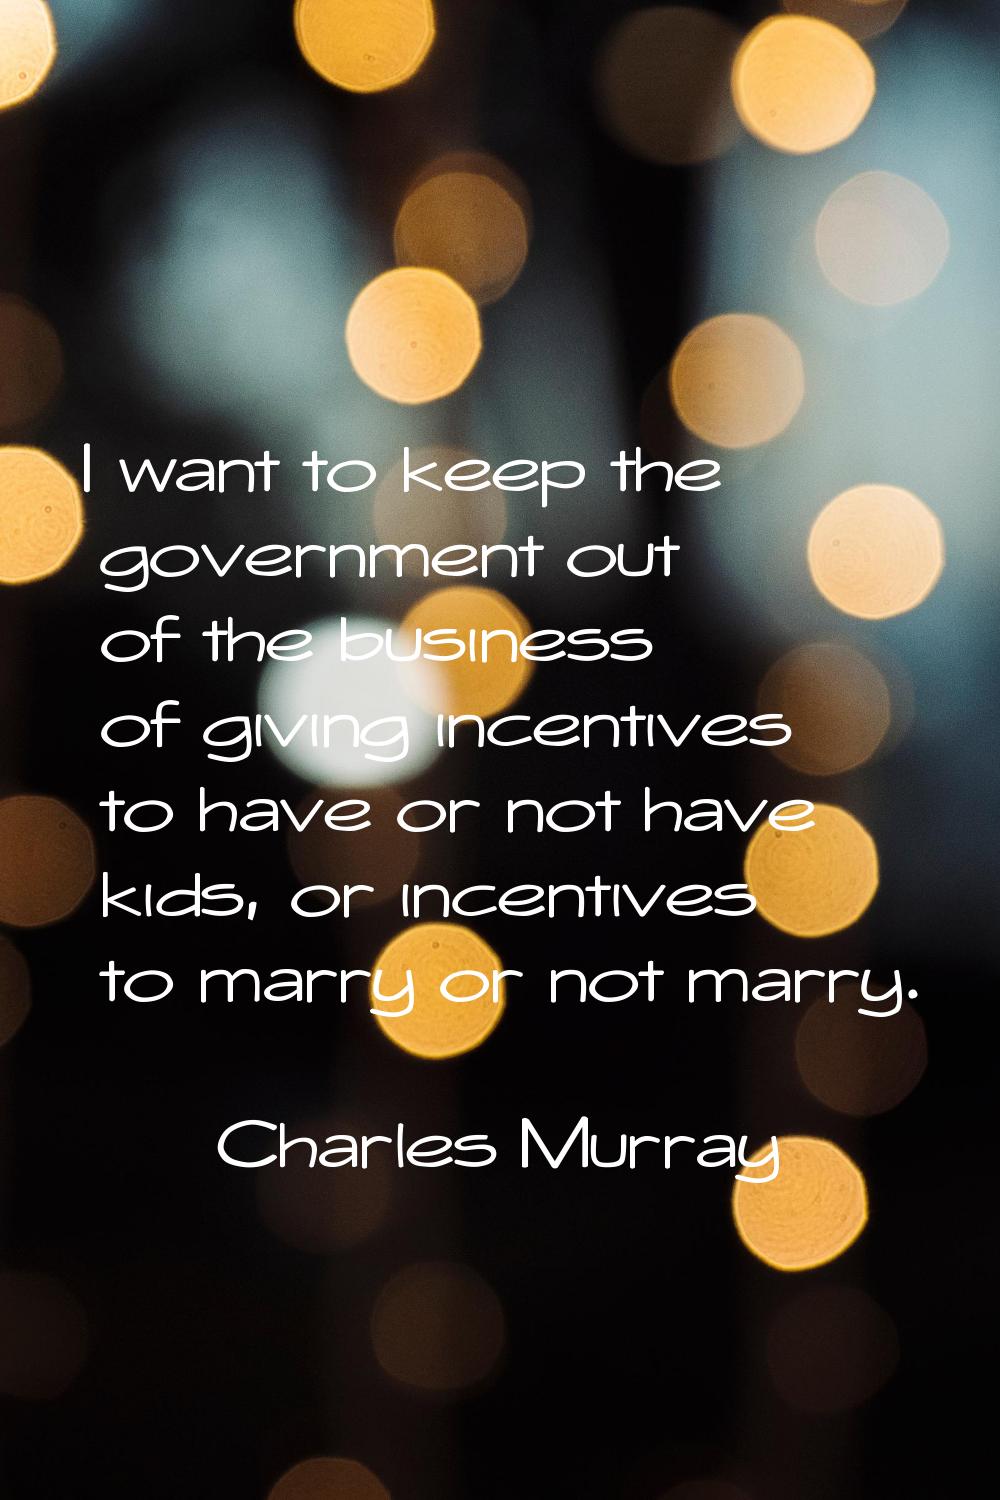 I want to keep the government out of the business of giving incentives to have or not have kids, or